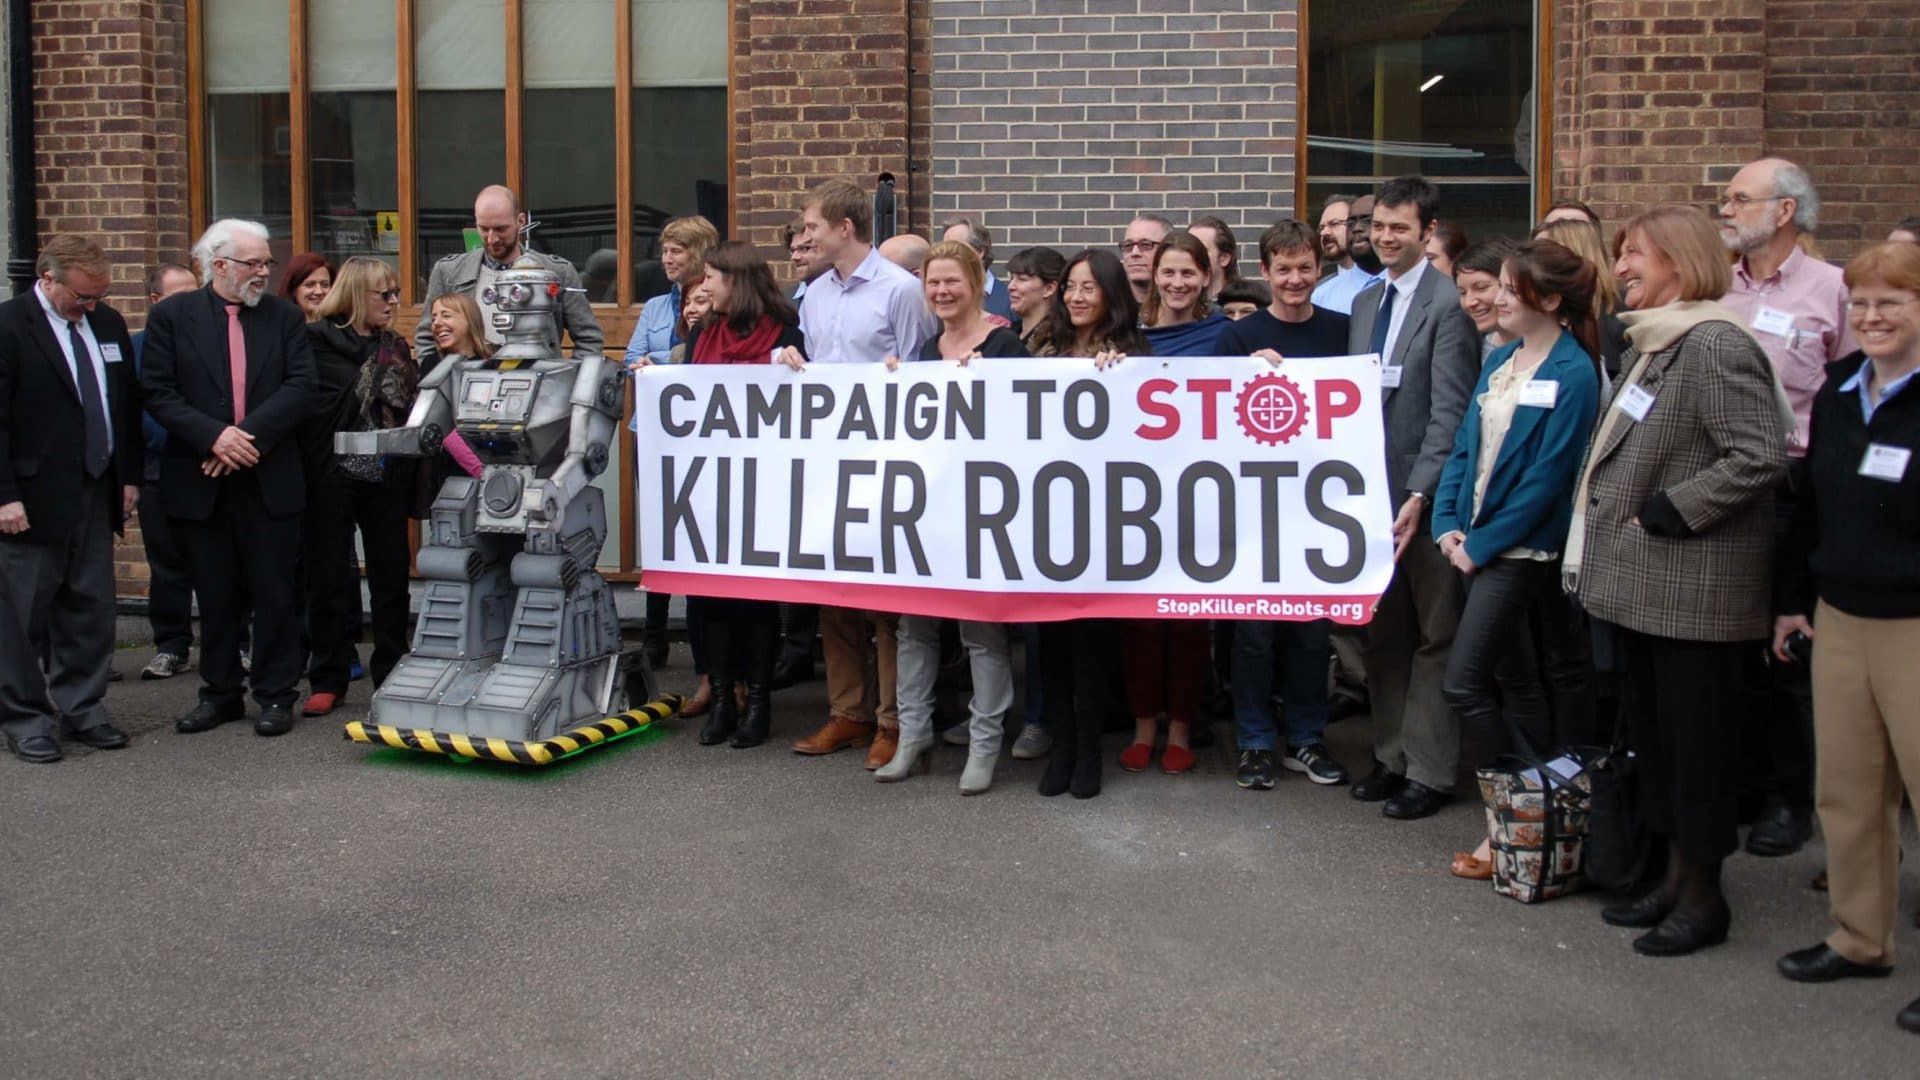 Activists hold a banner for the Campaign to Stop Killer Robots.